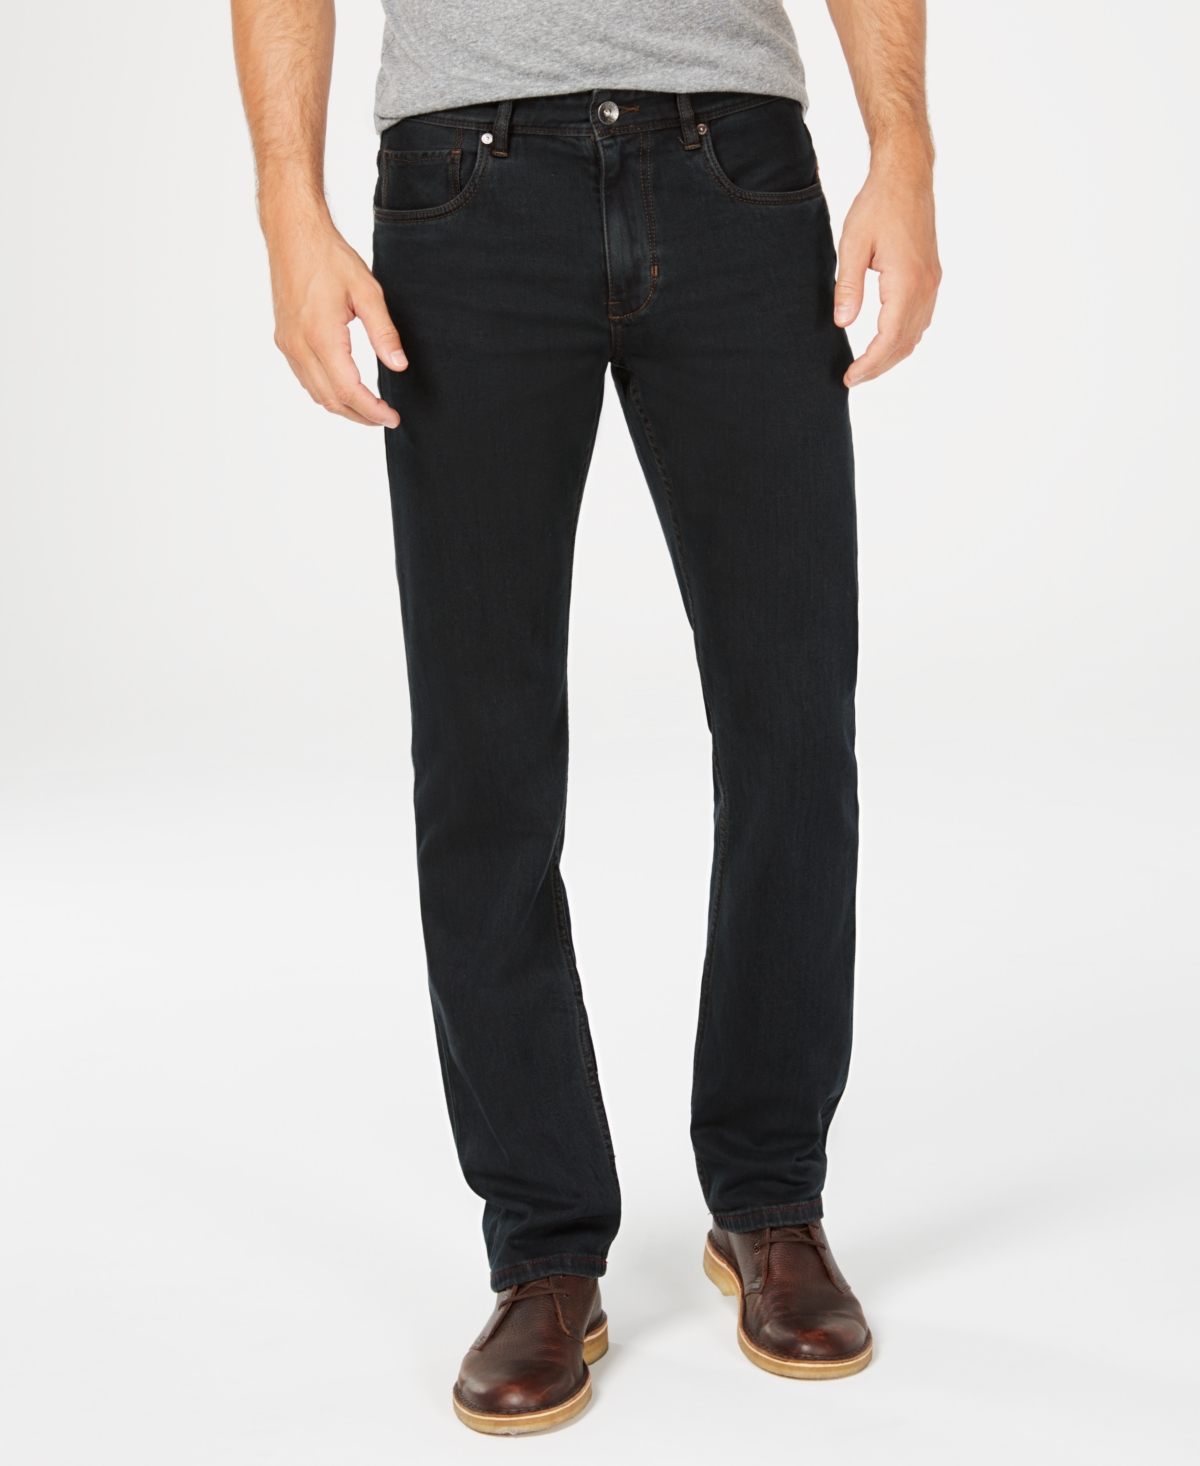 UPC 719260422520 product image for Tommy Bahama Men's Antigua Cove Authentic Fit Jeans | upcitemdb.com